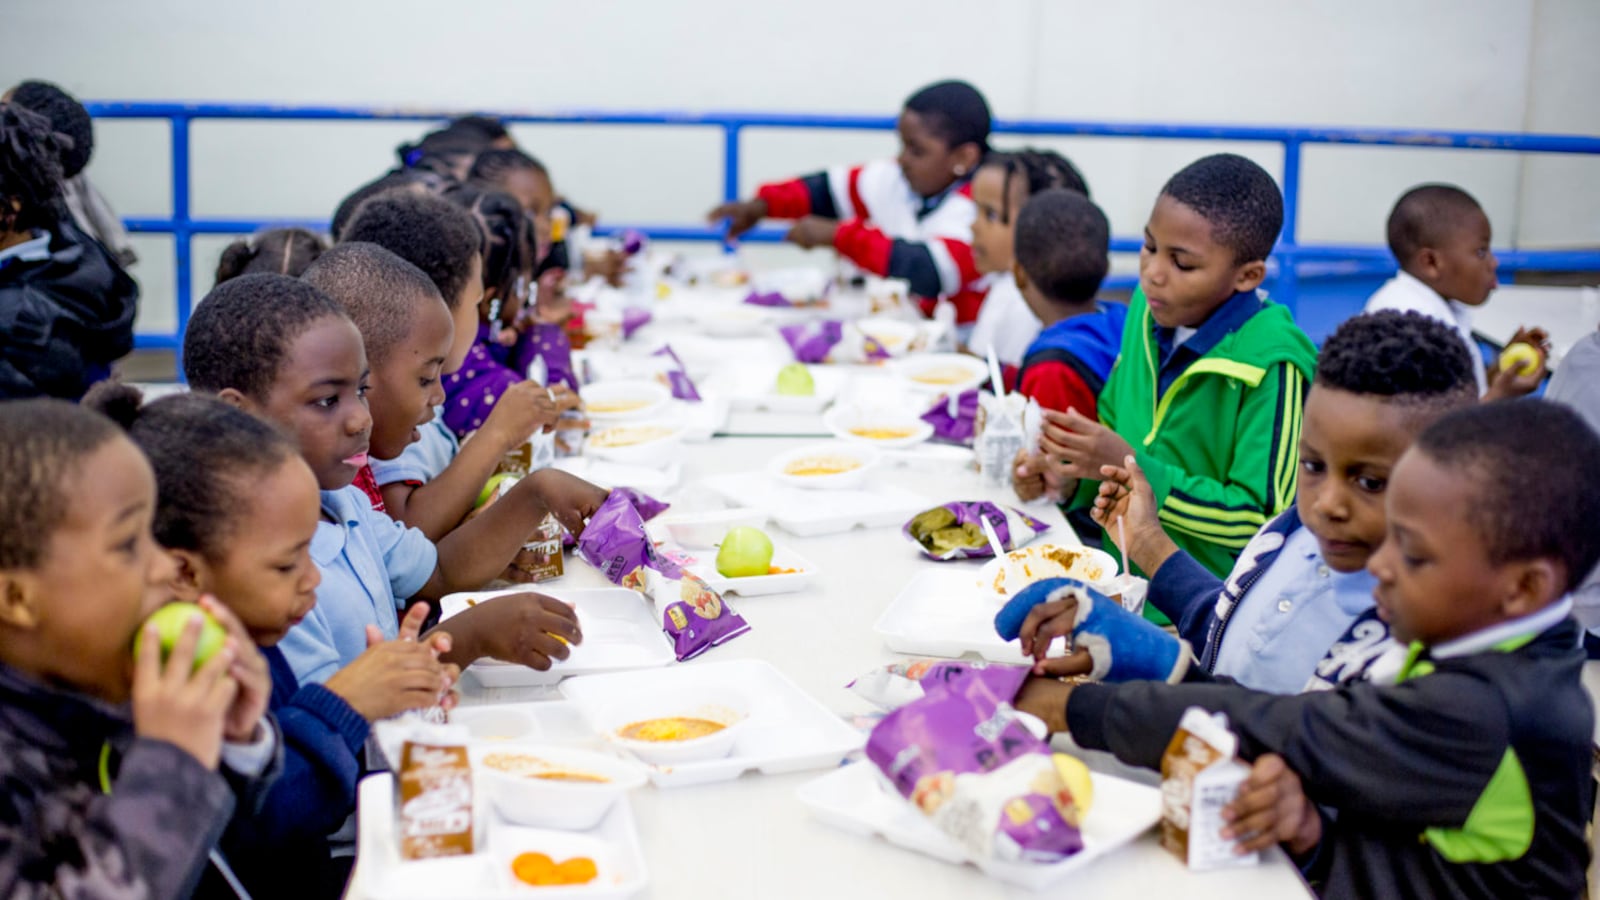 Young children sit at a long white table and eat lunch in a school cafeteria.